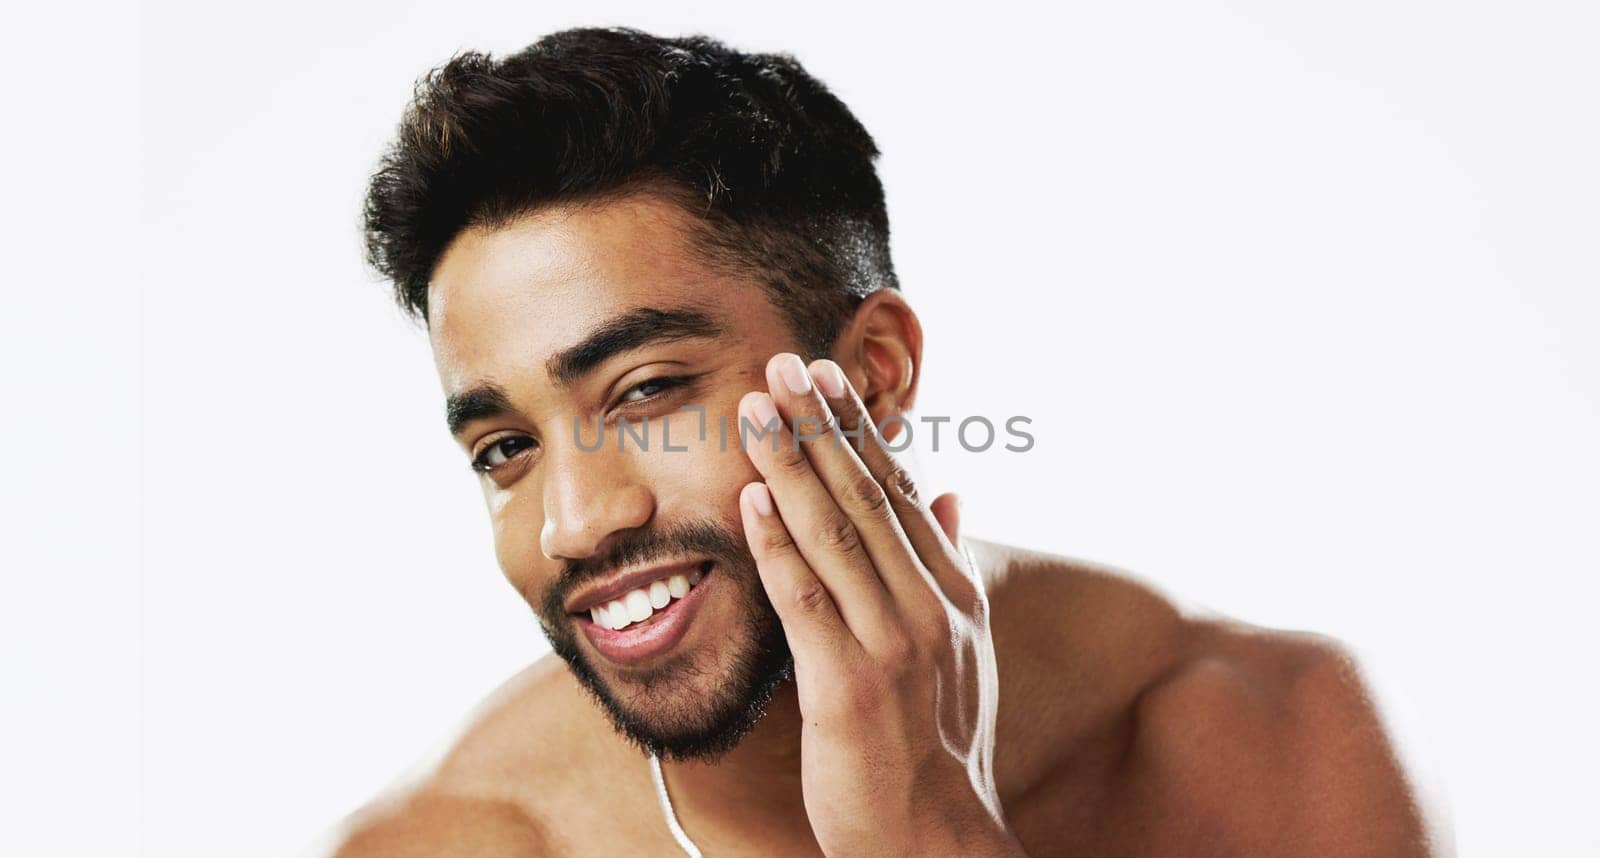 Skincare, man and hands of face, happy and laughing against white background space. Touch, smile and portrait of Indian male model excited for wellness, beauty and cosmetic care result while isolated.